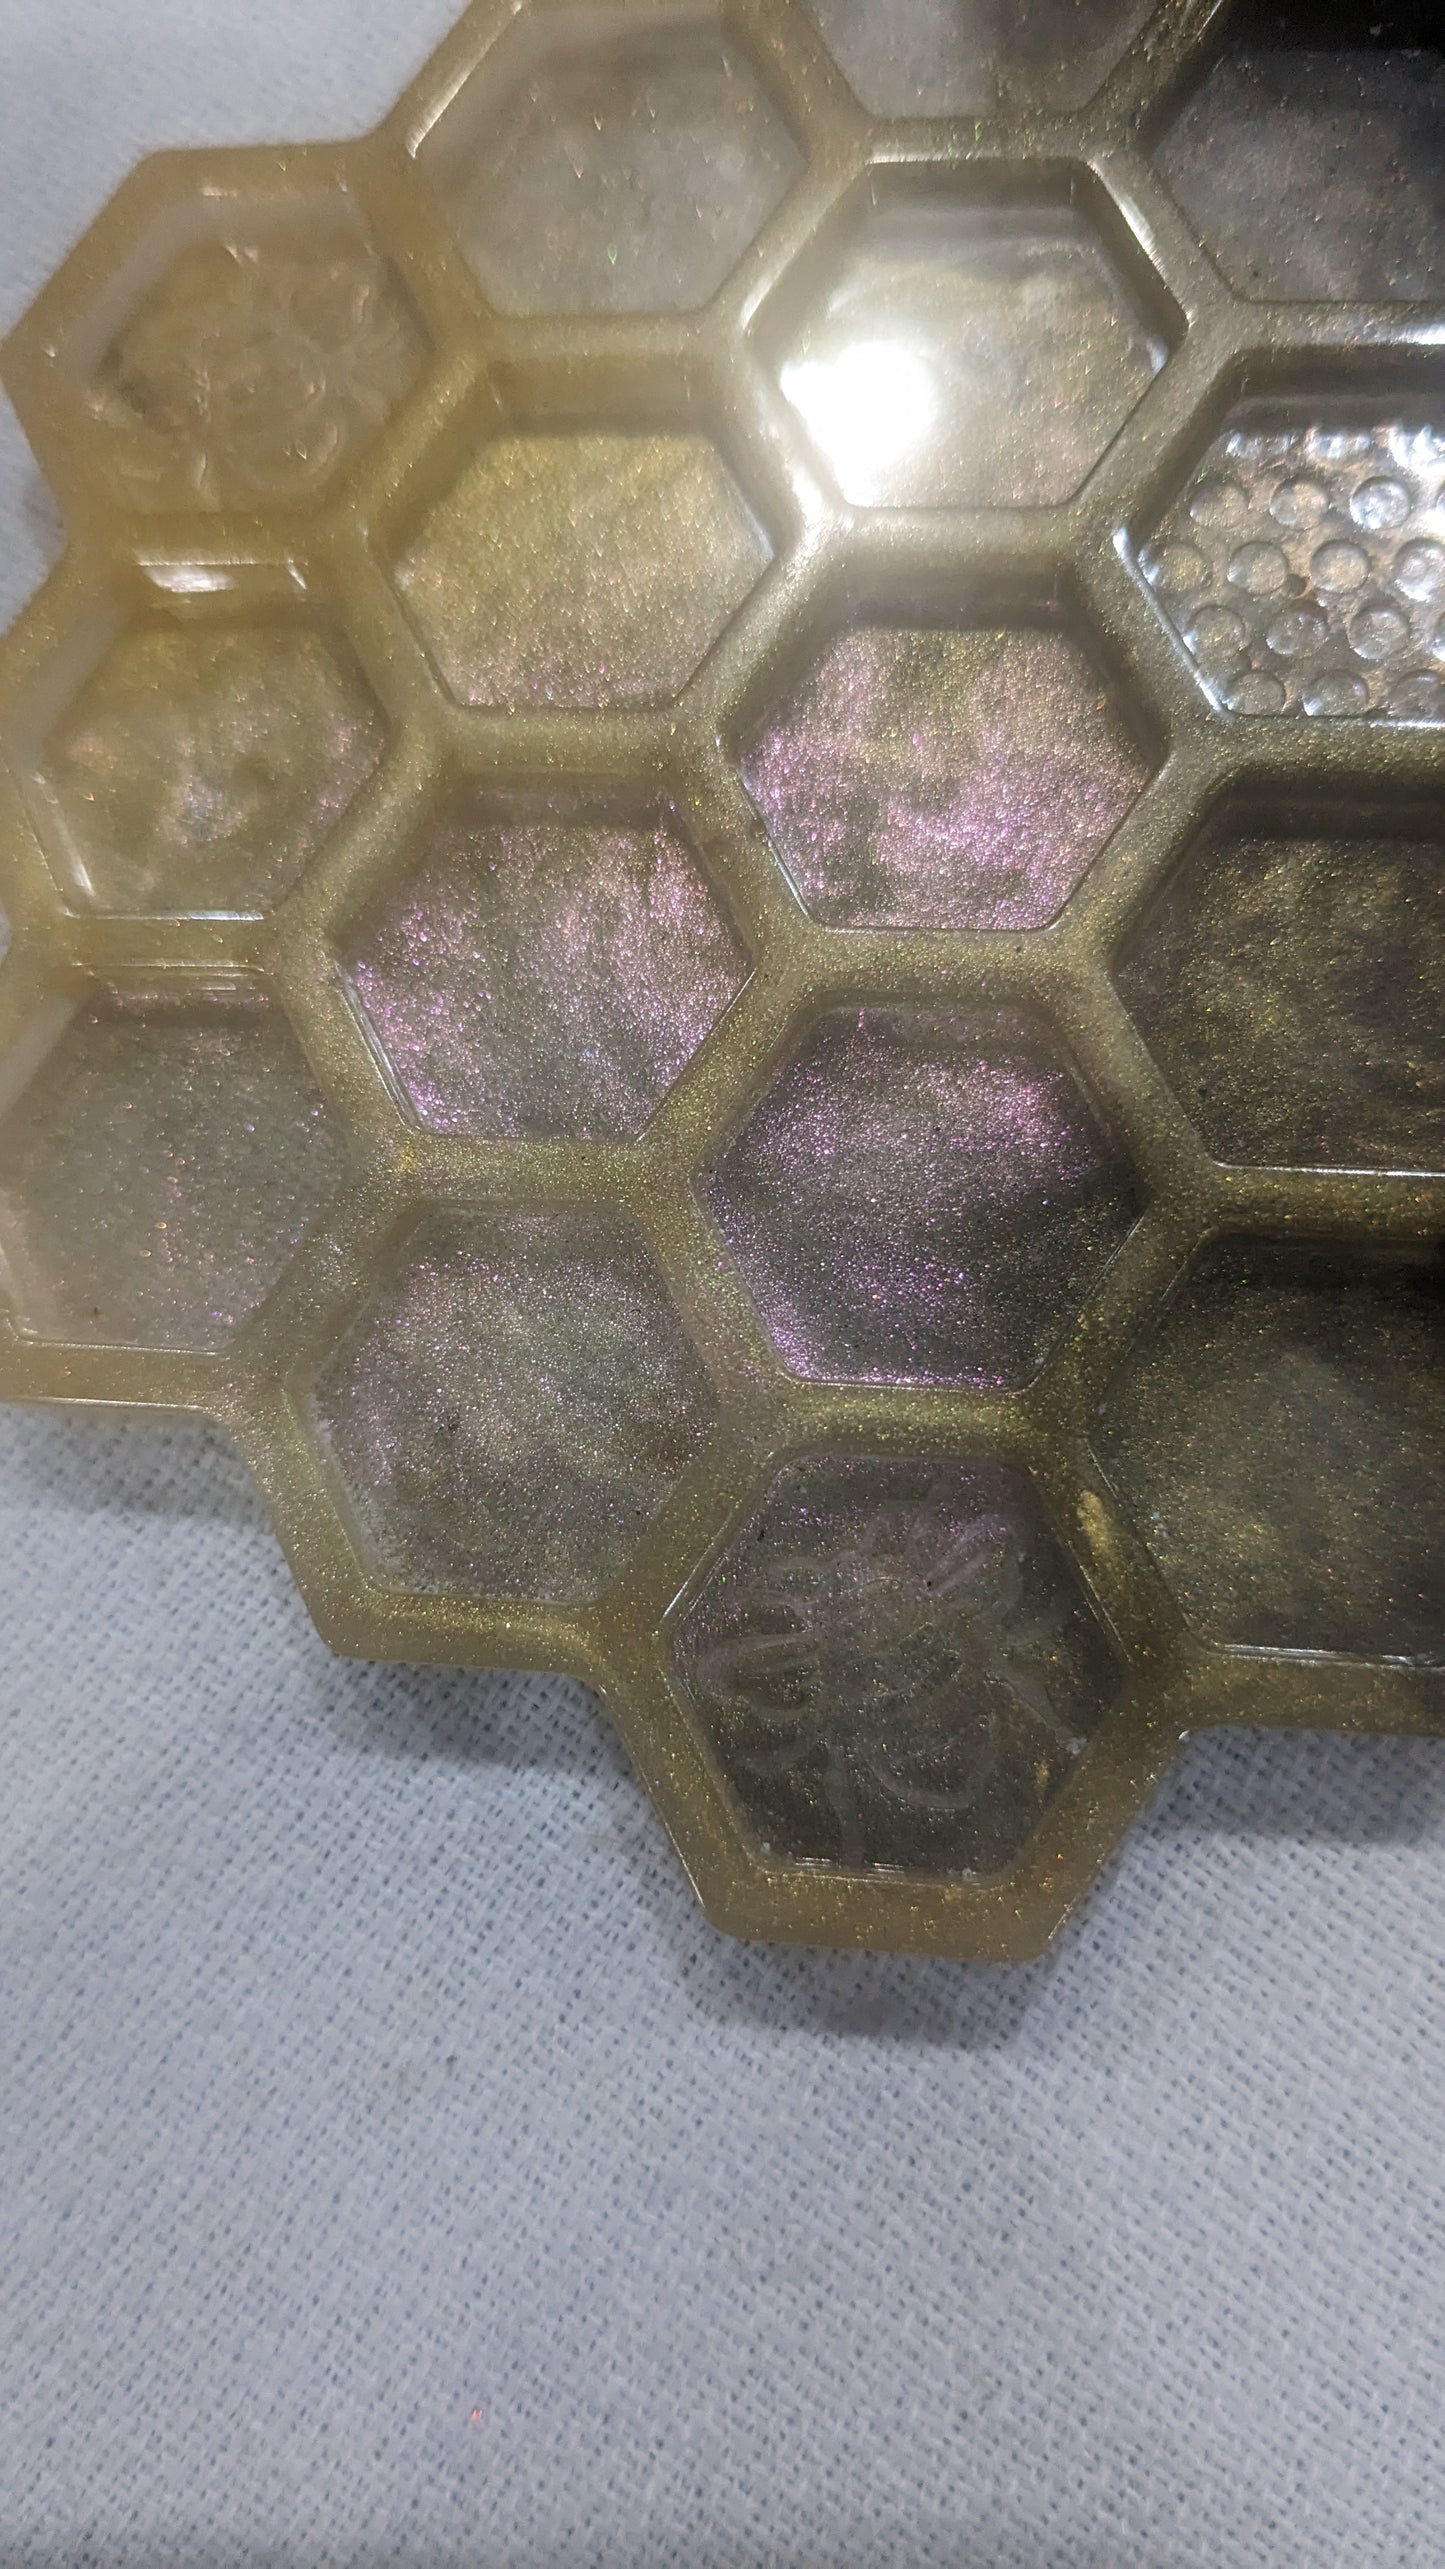 Coaster Set black and gold honeycomb and Bee